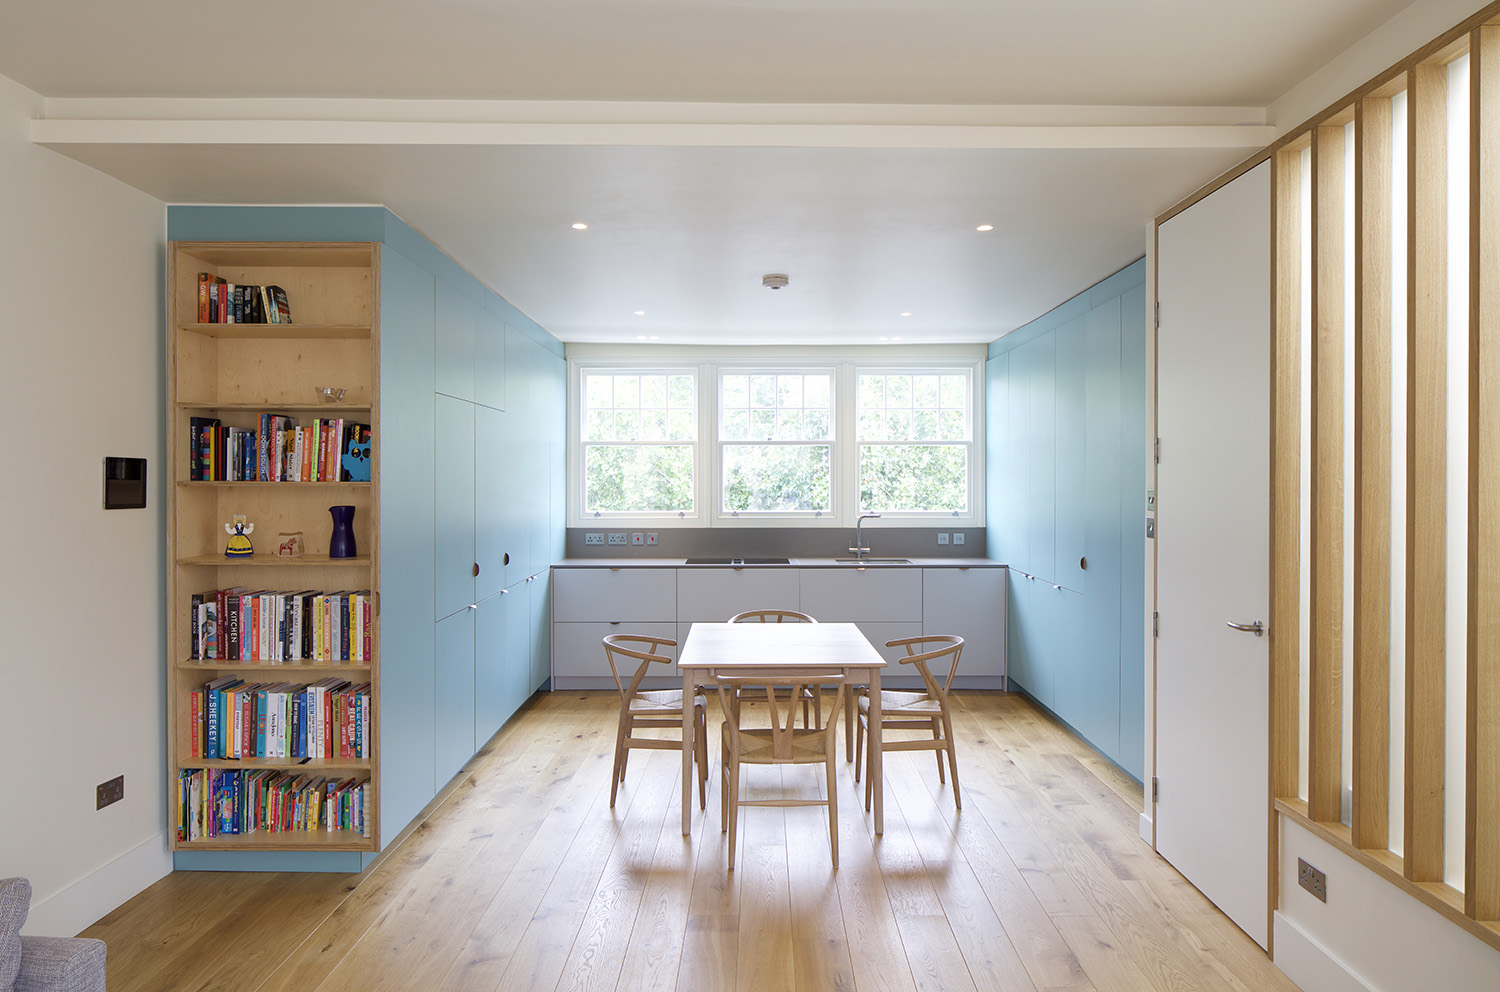 </p> <p>Find your ideal home design pro on designfor-me.com - get matched and see who's interested in your home project. Click image to see more inspiration from our design pros</p> <p>Design by Matt, architect from Islington, London</p> <p>#architecture #homedesign #modernhomes #homeinspiration #kitchens #kitchendesign #kitcheninspiration #kitchenideas #kitchengoals #architecturedetails </p> <p>